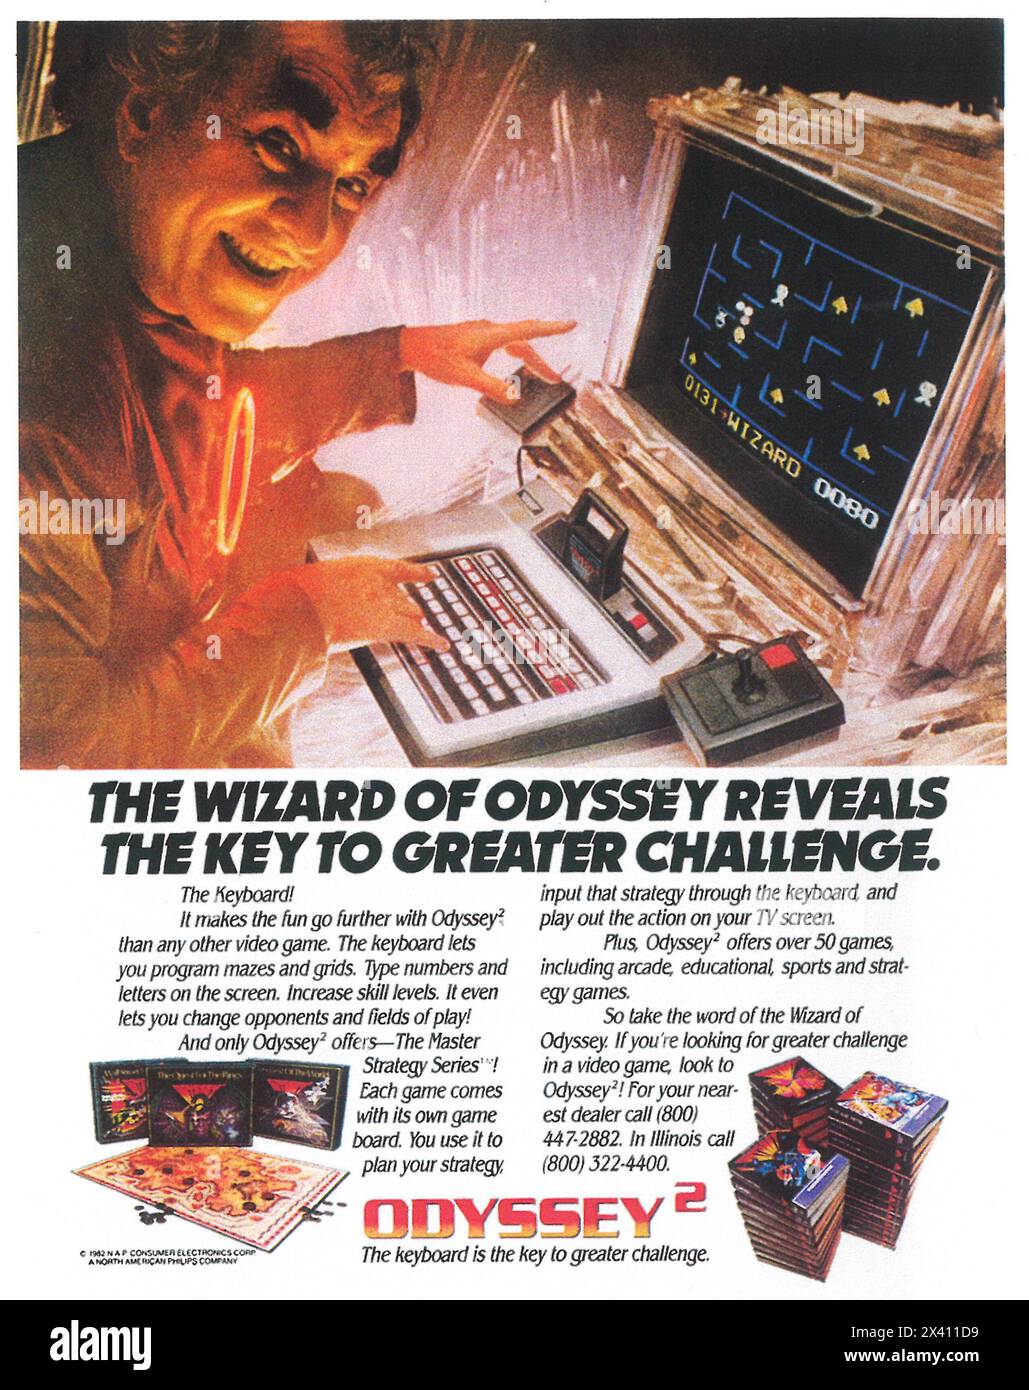 1982 Magnavox Odyssey 2 game system ad - 'Wizard of Odyssey' Stock Photo